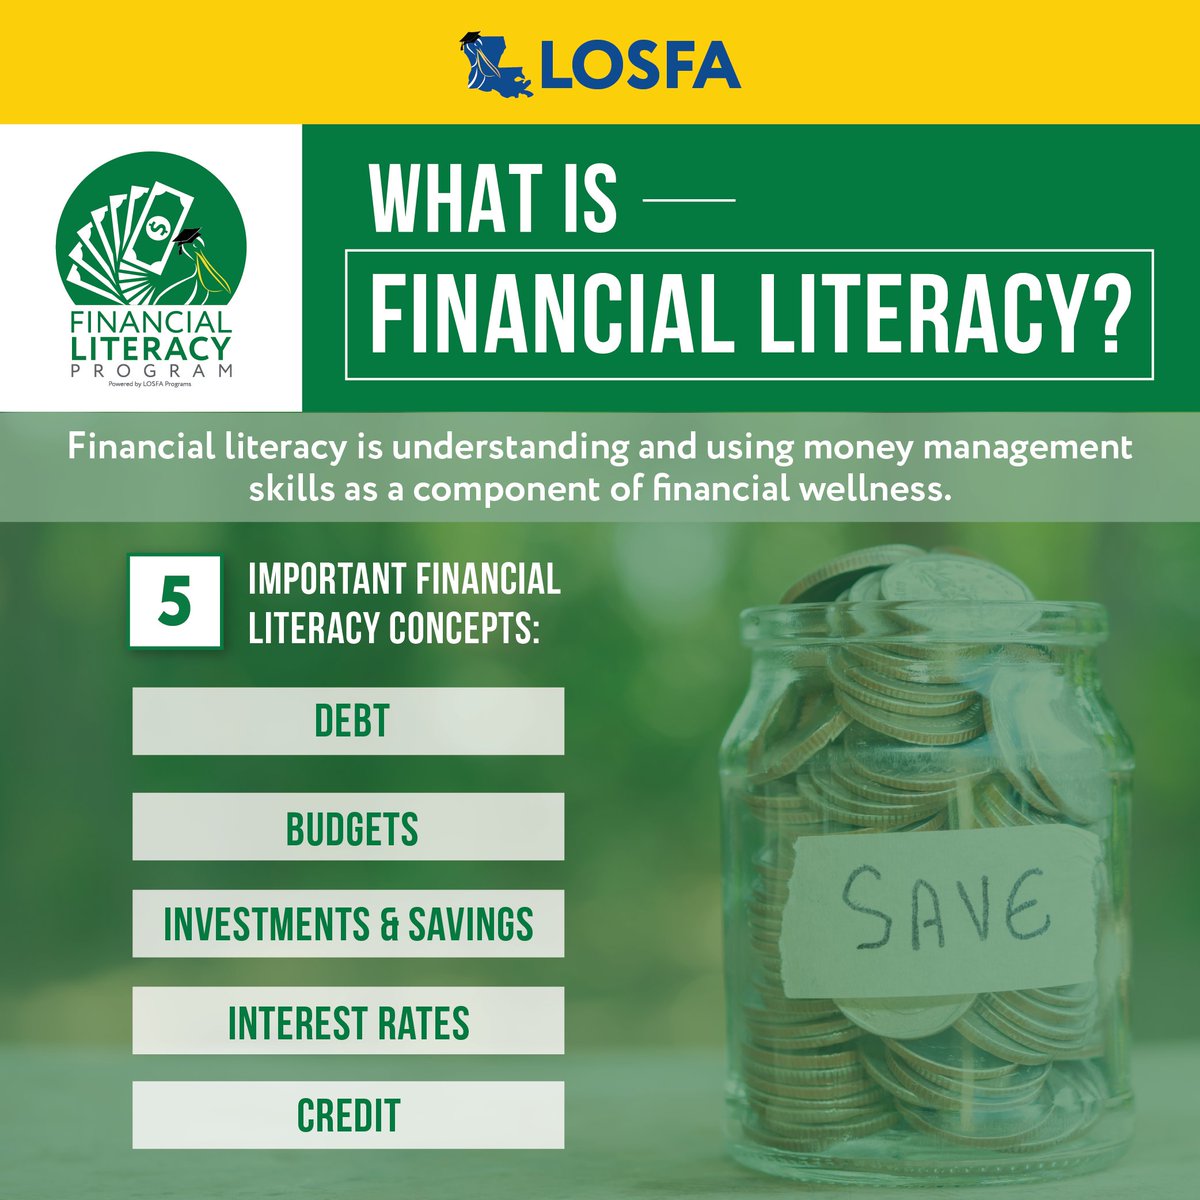 Did you know that April is National #FinancialLiteracyMonth? What is Financial Literacy? Financial literacy is understanding and using money management skills as a component of financial wellness. During the month, we'll be sharing tips on financial literacy.